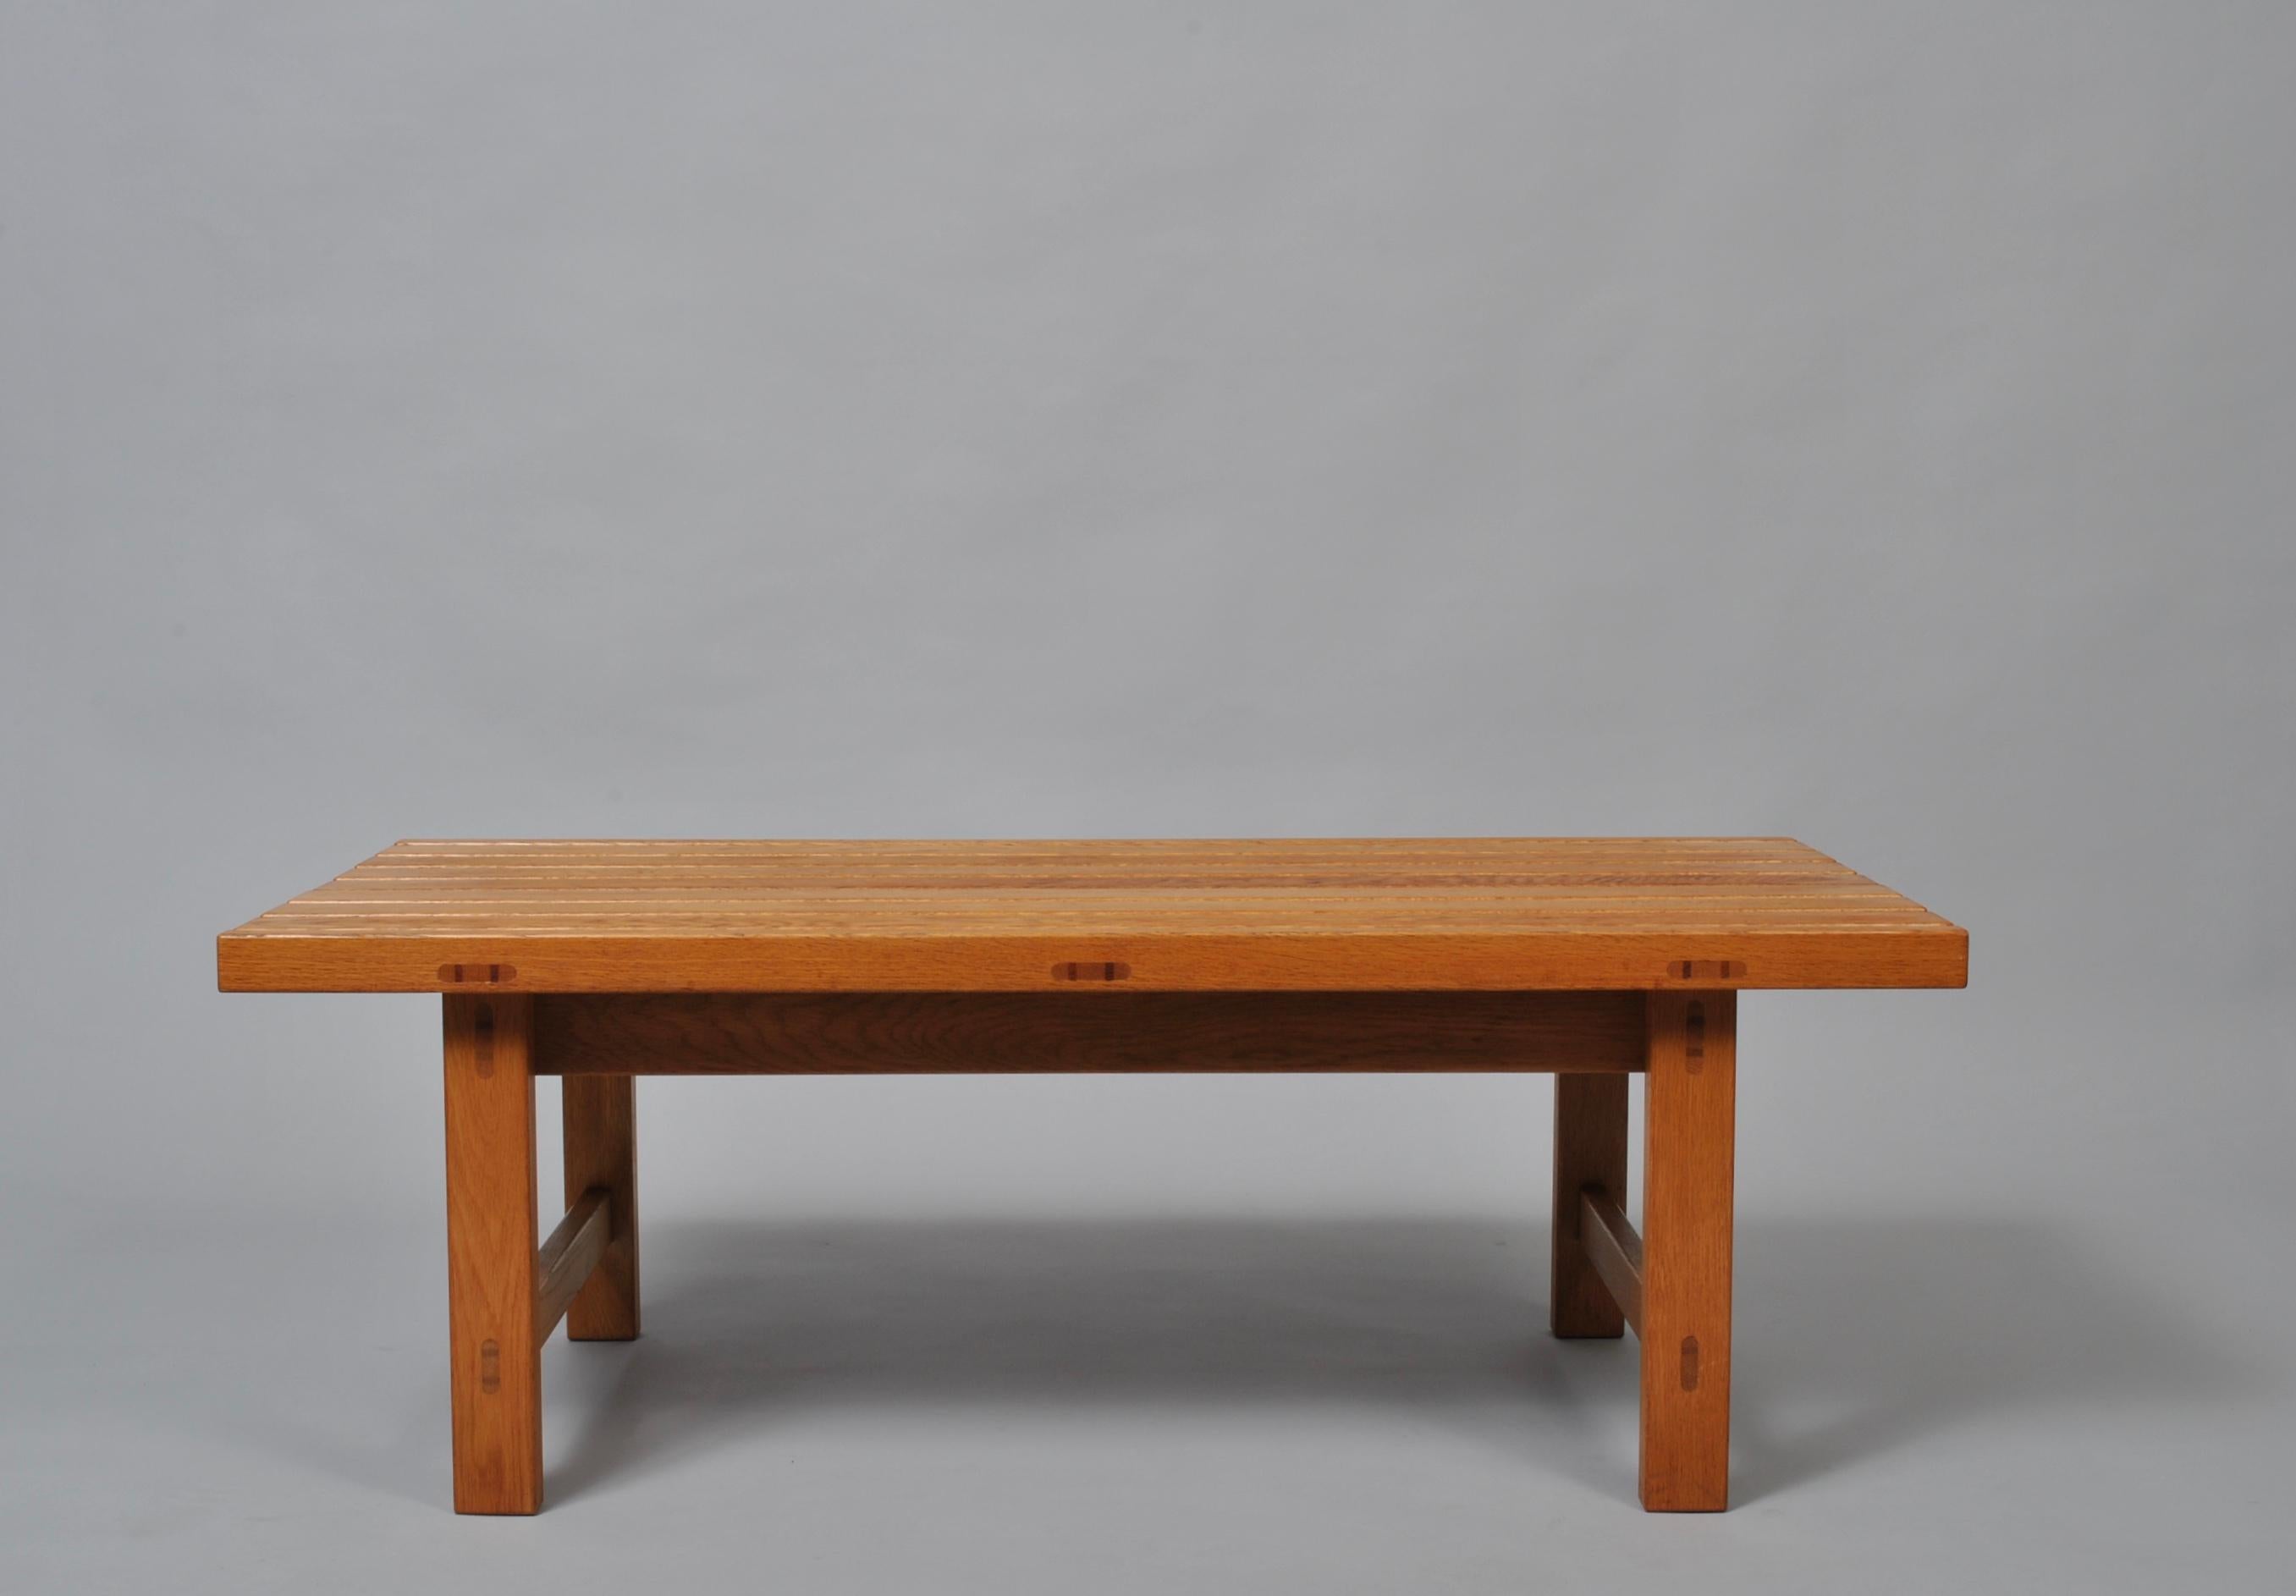 A lovely Mid-Century Modern bench or table. Expertly created Danish craftsman oak bench - or table - in the manner of Borge Mogensen. Beautiful exposed joints to the European oak construction. Produced circa 1960, Denmark. Can be very easily